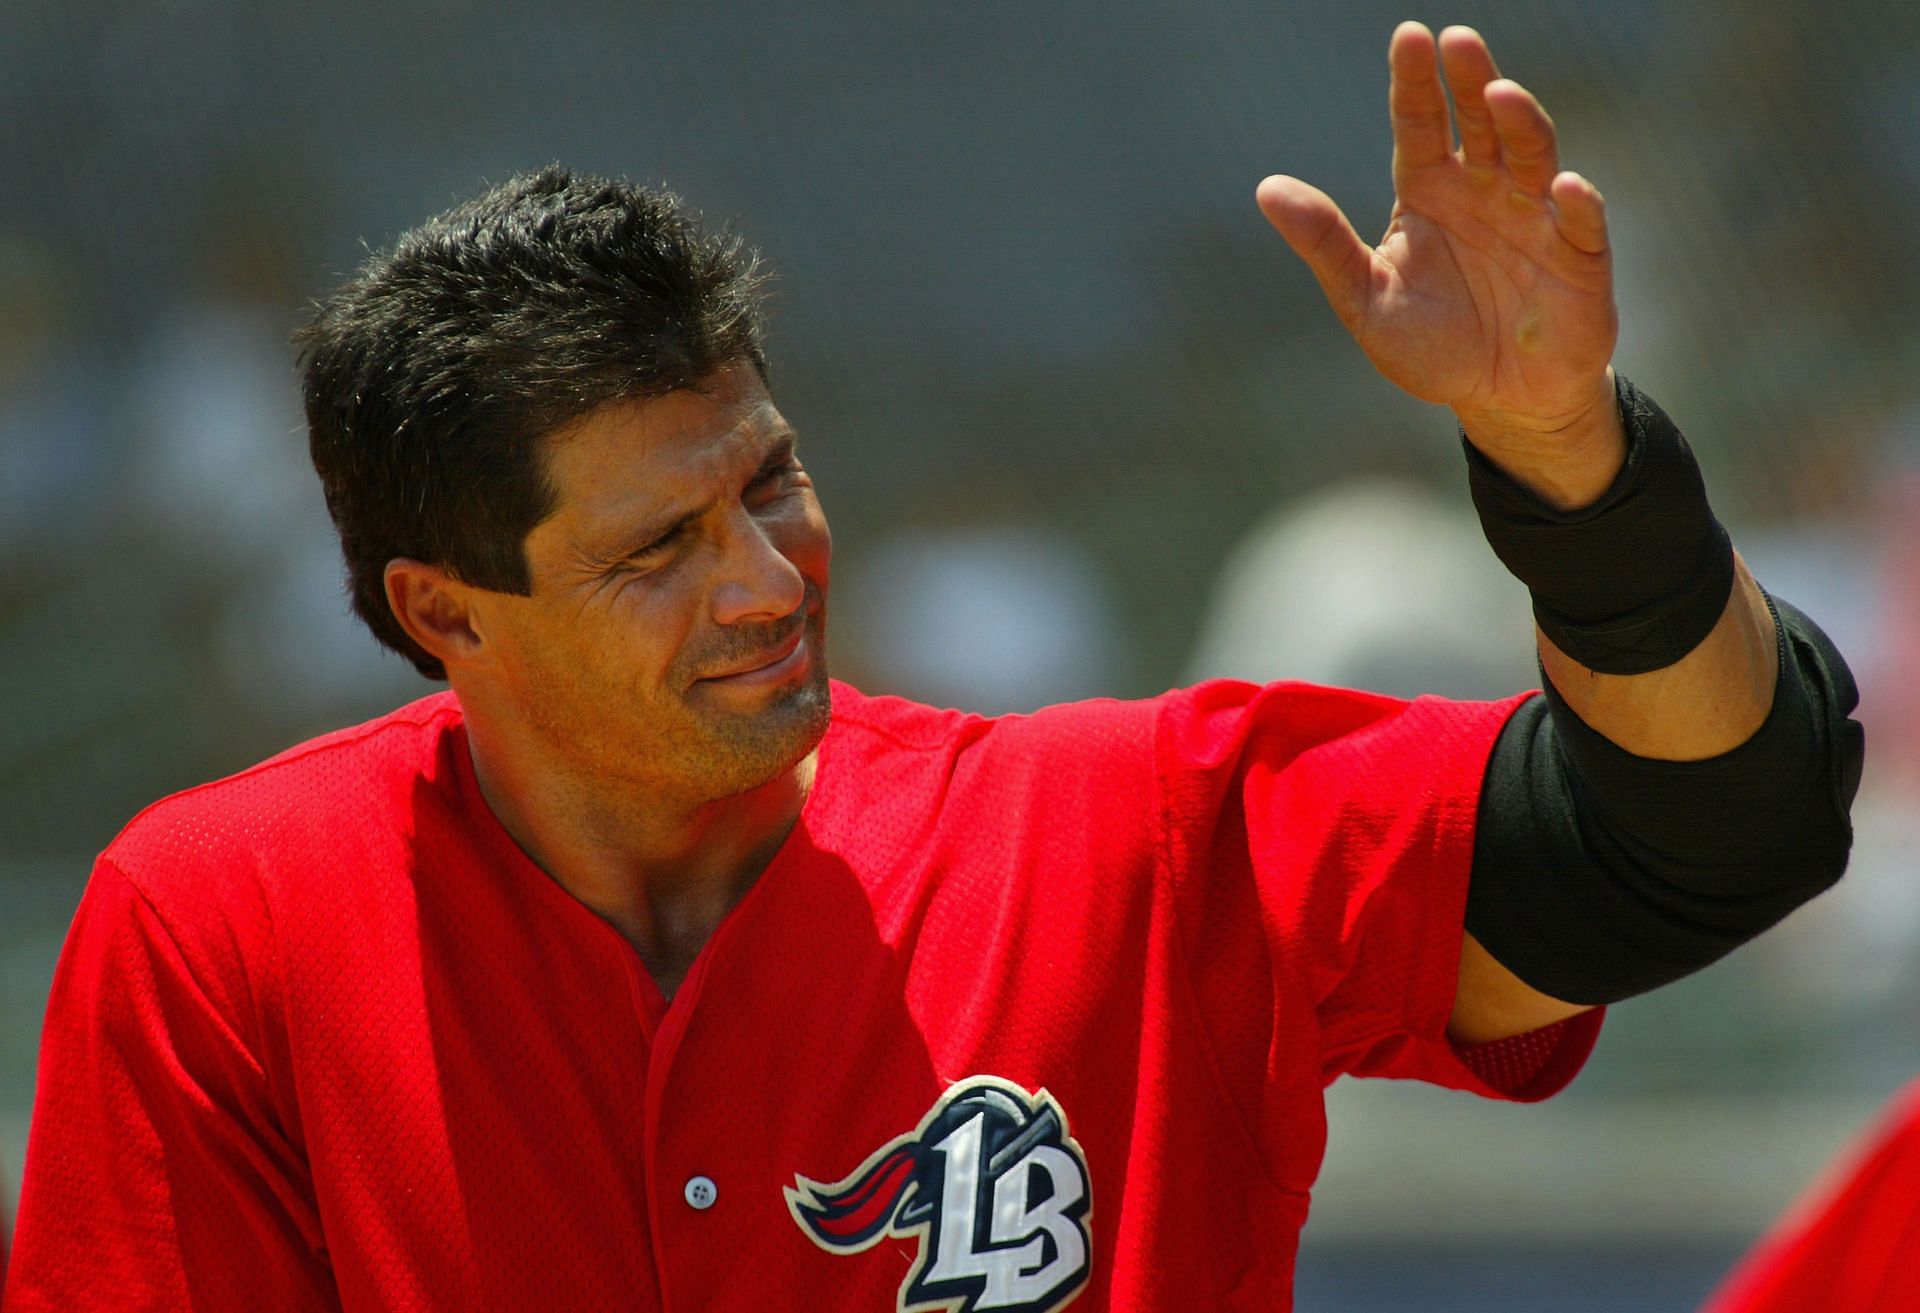 jose canseco net worth